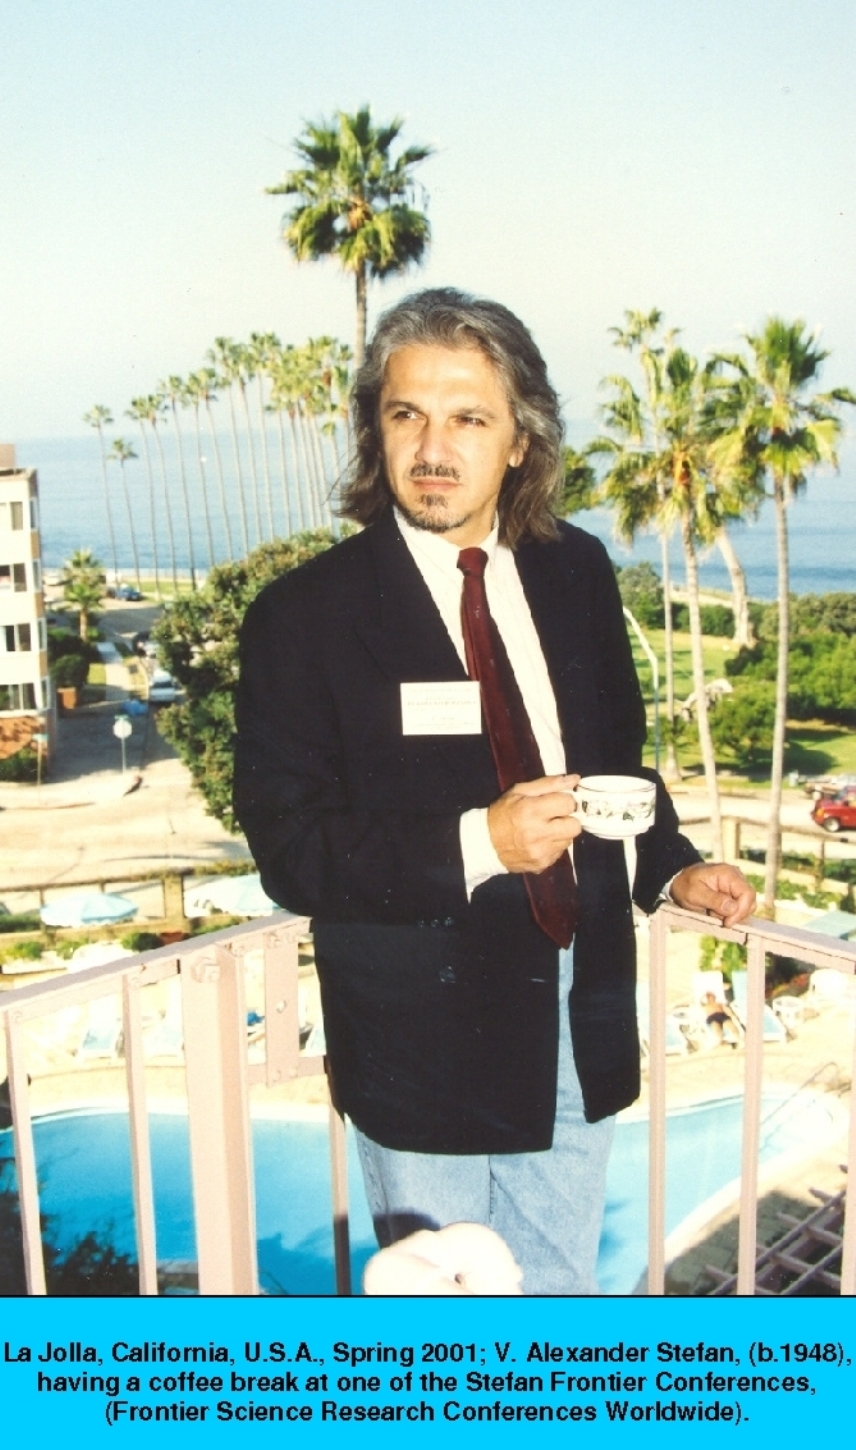 La Jolla, California, U.S.A., Spring 2001; V. Alexander Stefan, (b.1948), having a coffee break at one of the Stefan Frontier Conferences, (Frontier Science Research Conferences Worldwide).